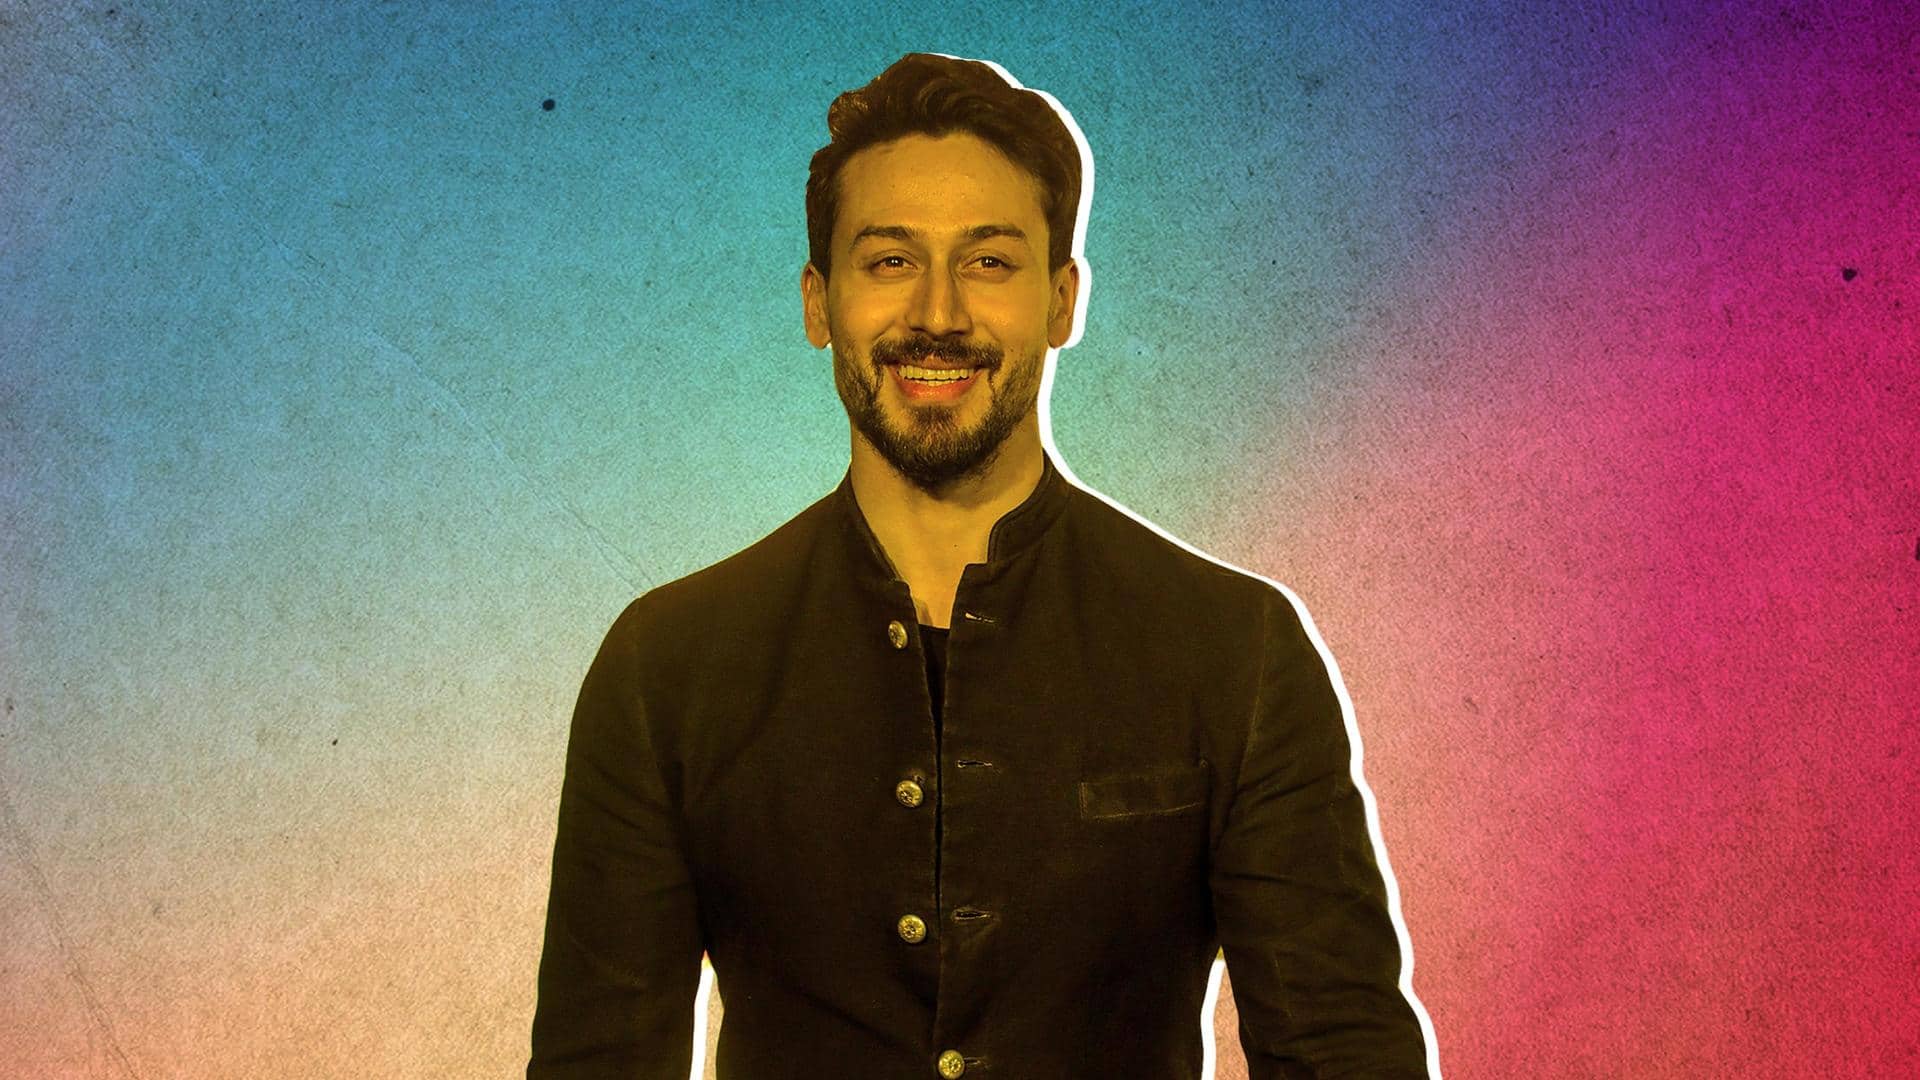 Happy birthday, Tiger Shroff: 5 fun facts about the actor